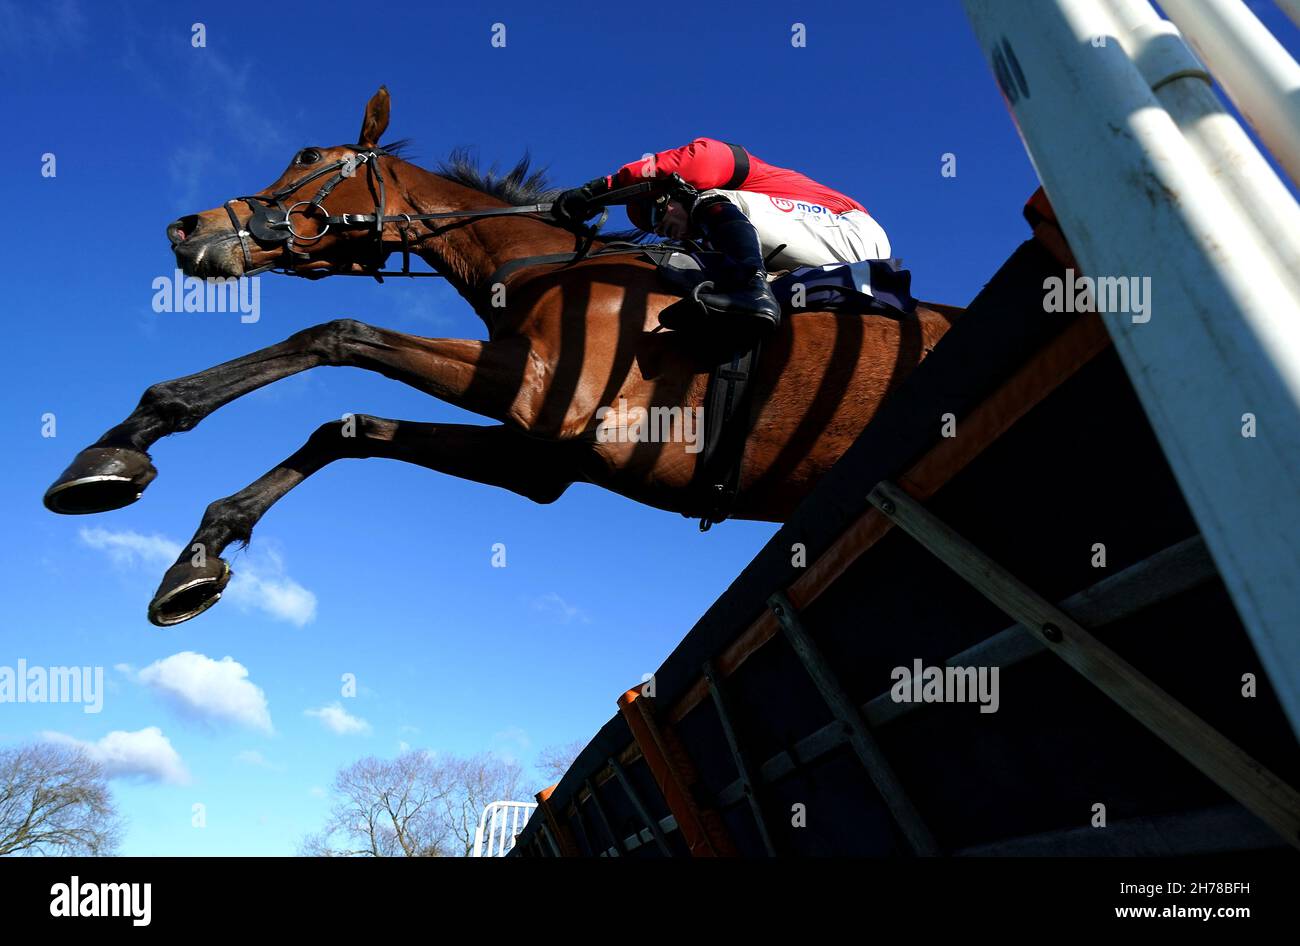 Gaia Du Gouet ridden by jockey Harry Skelton on their way to winning the Charles Hedley Country Clothing Mares' 'National Hunt' Novices' Hurdle at Uttoxeter Racecourse, Staffordshire. Picture date: Sunday November 21, 2021. Stock Photo